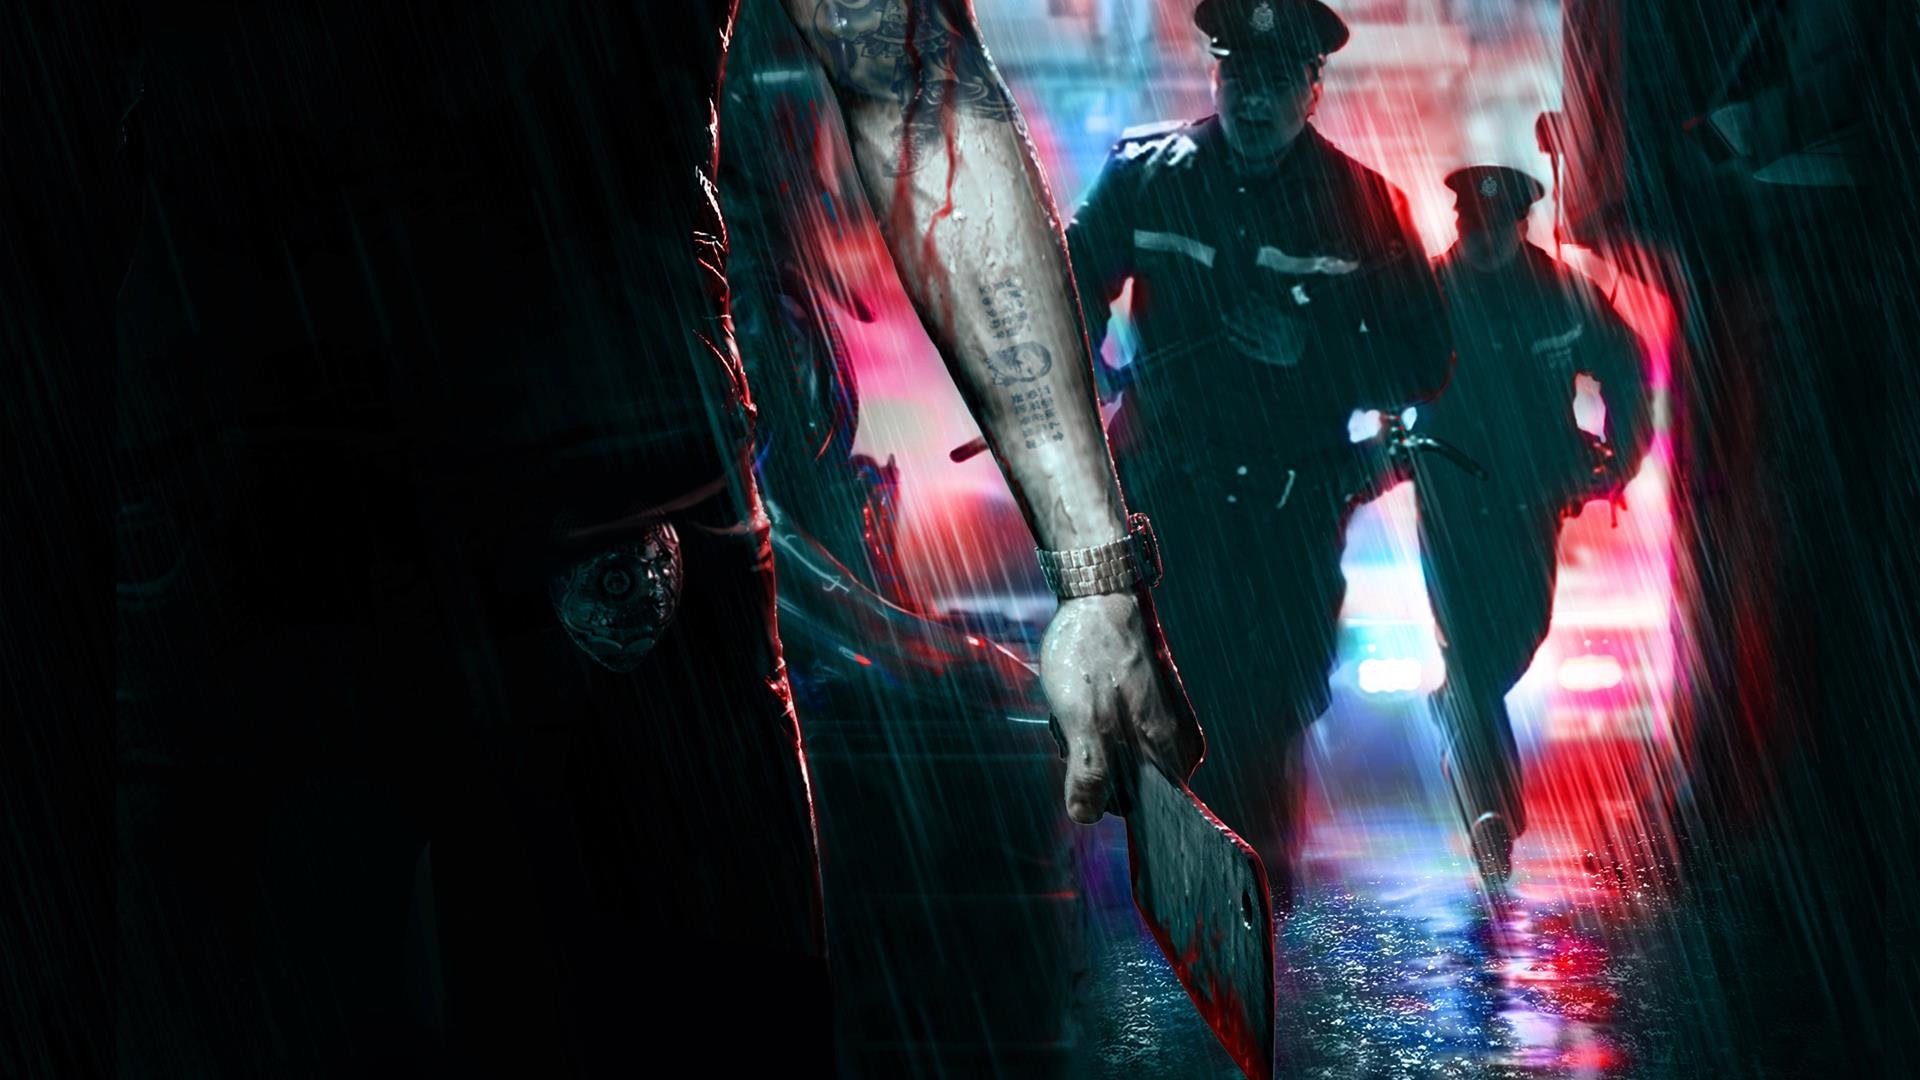 android sleeping dogs background